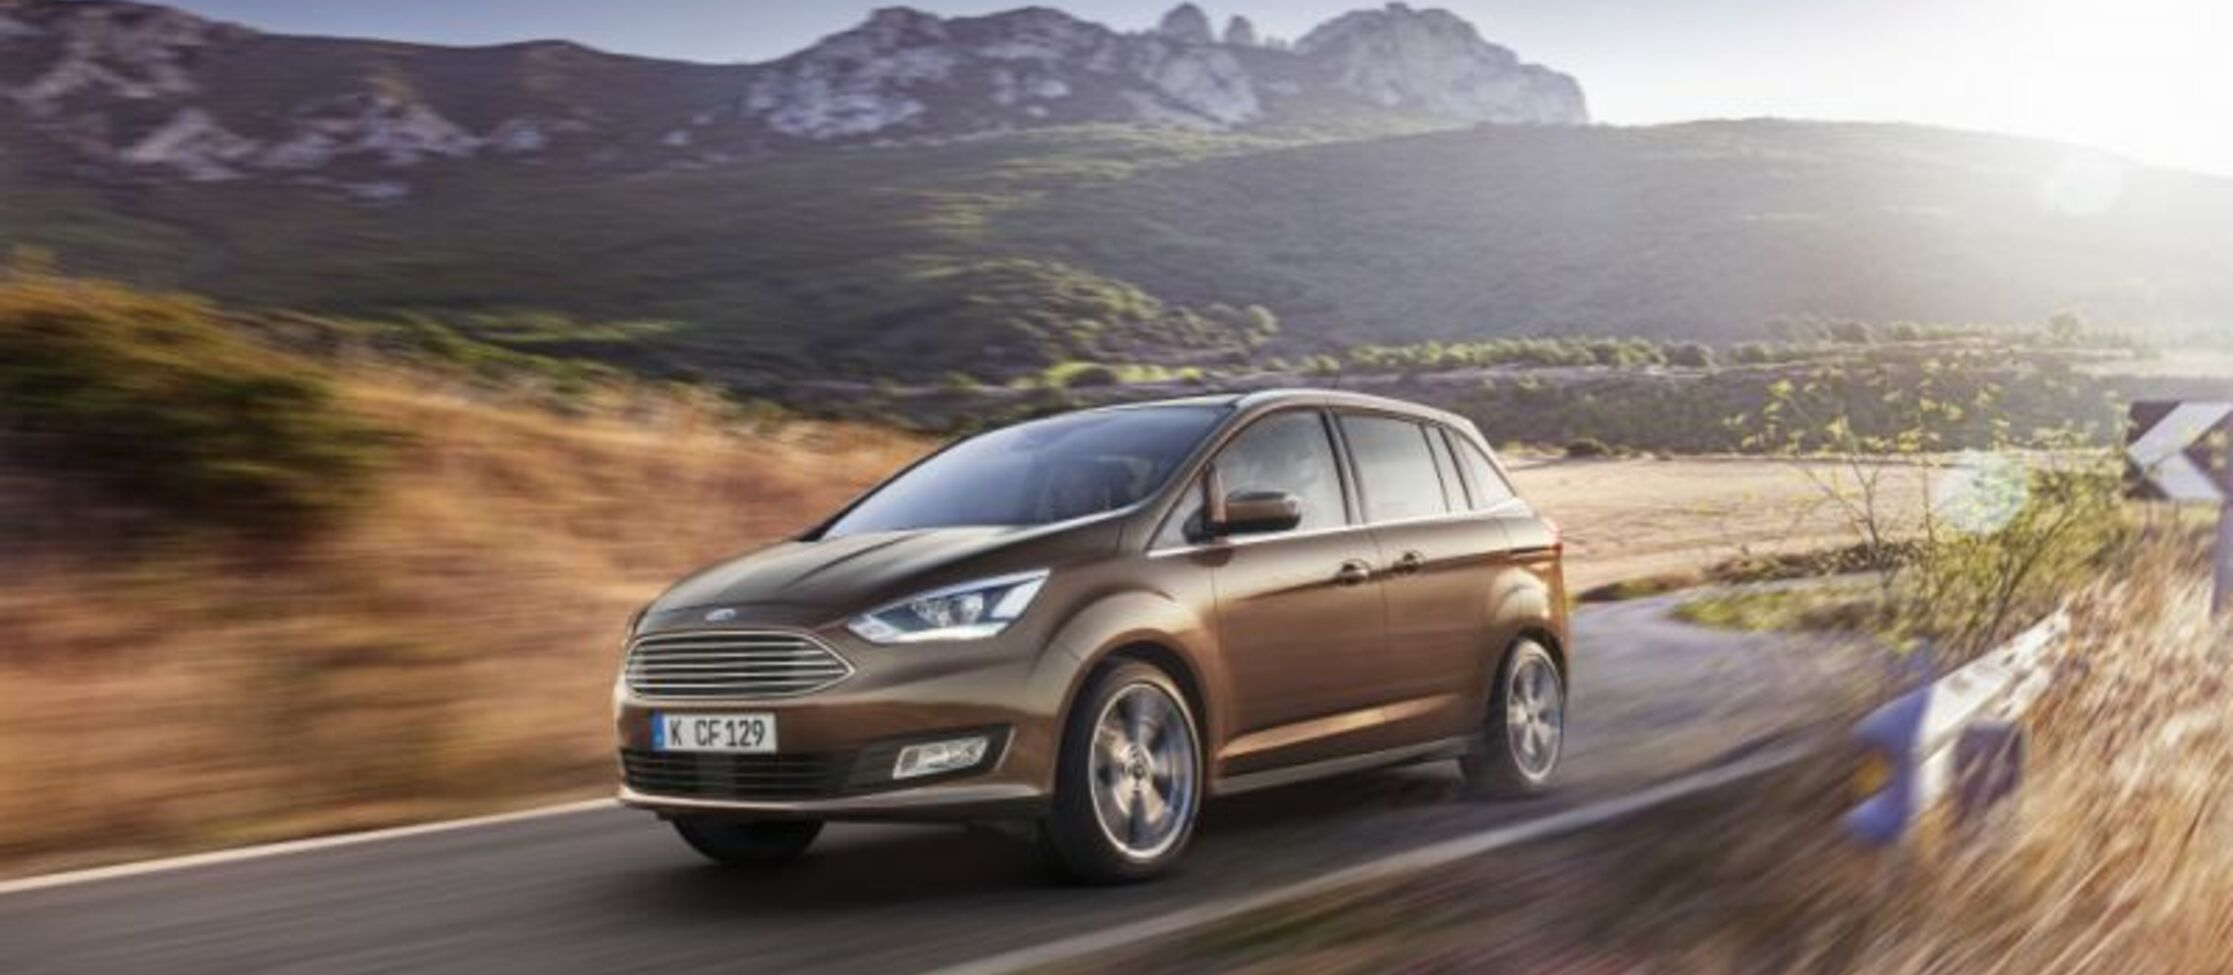 Ford Grand C-MAX (facelift 2015) 1.5 TDCi (120 Hp) S&S7 Seat 2015, 2016, 2017, 2018, 2019, 2020, 2021